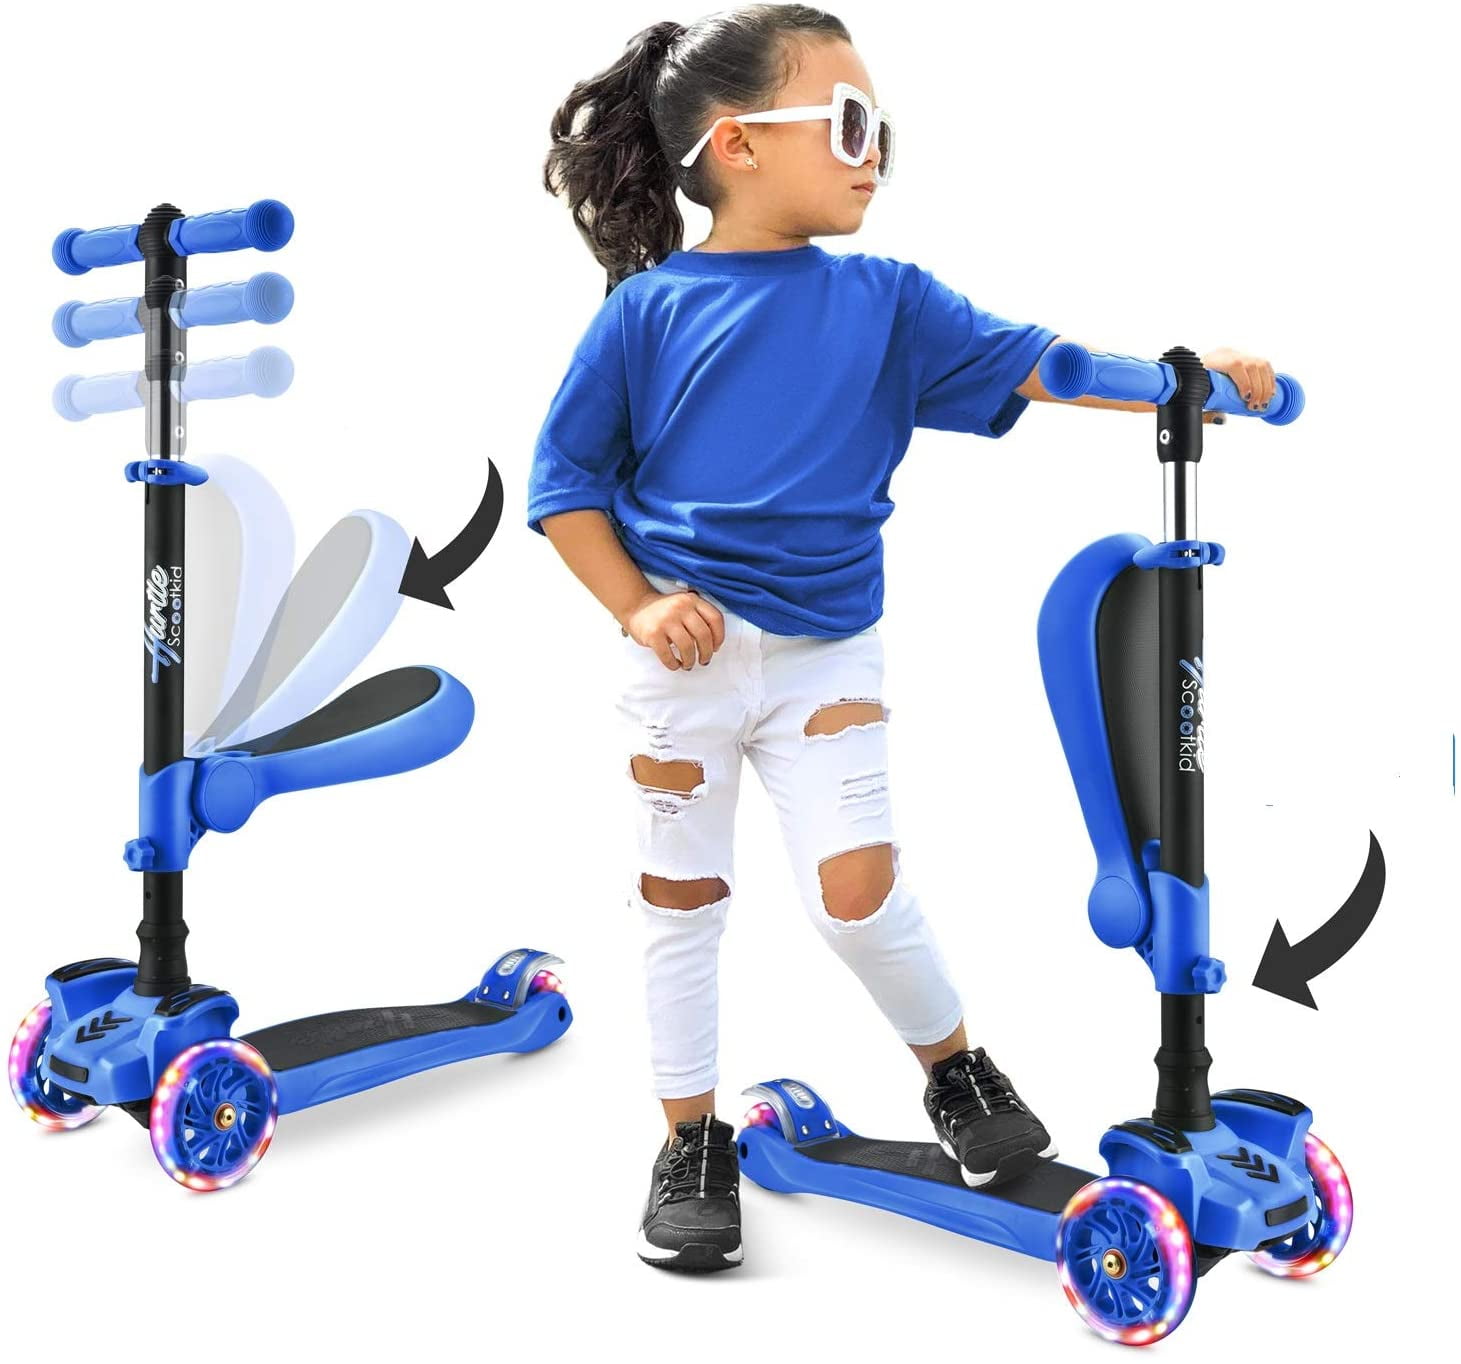 S SKIDEE BLUE Scooter for Kids has Foldable & Adjustable & Removable seat 